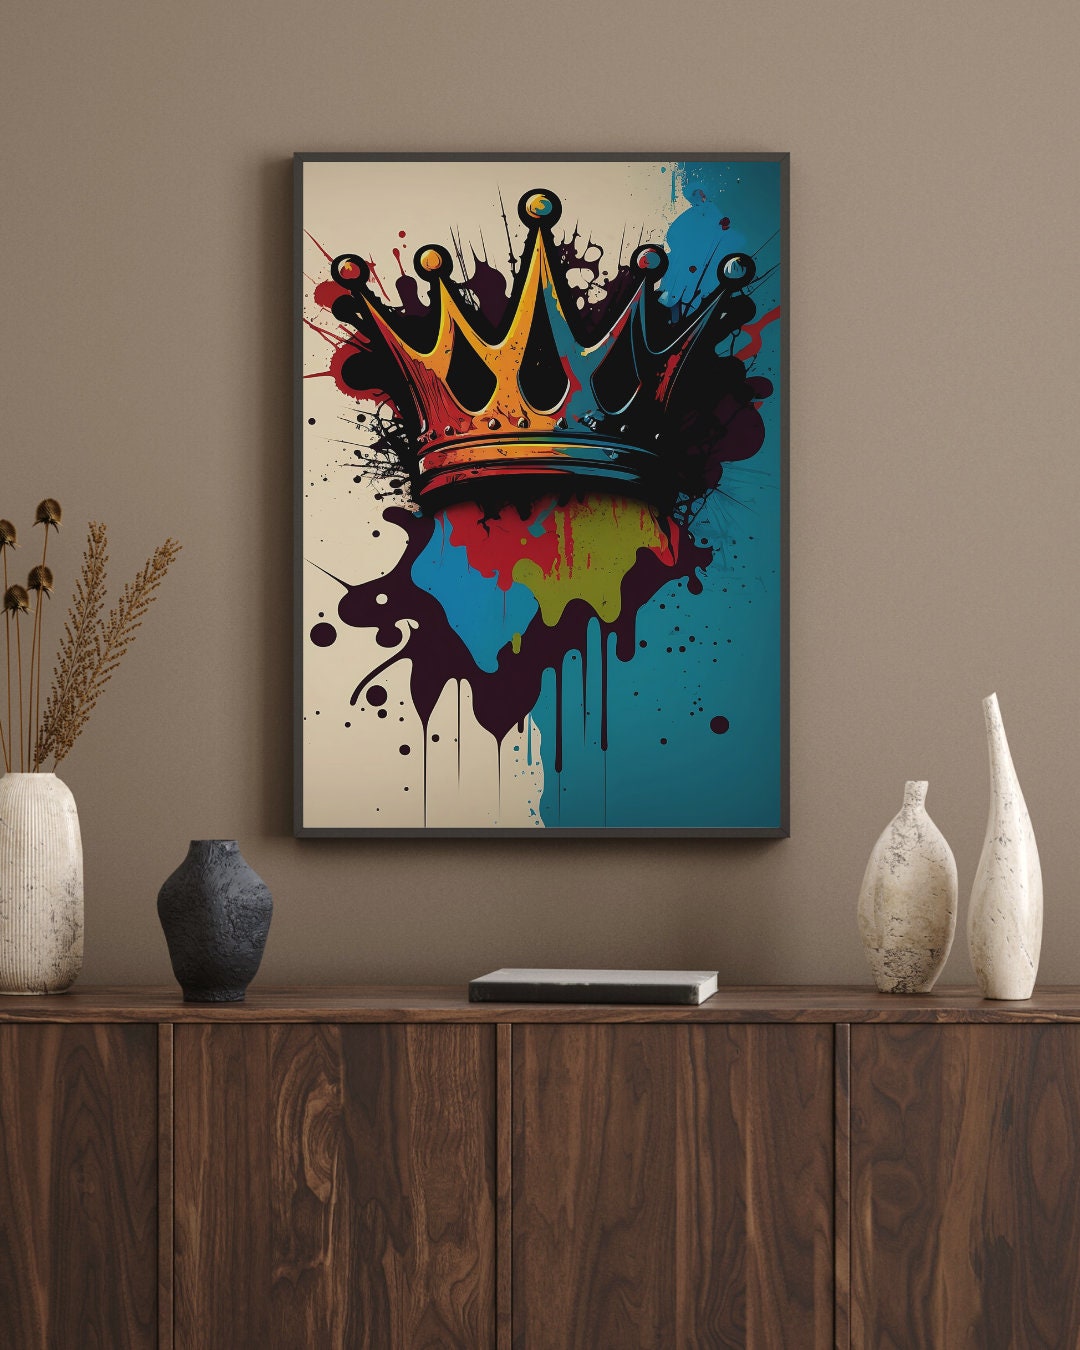 King Charles III Coronation: Graffiti Art of a Crown in Multiple Colors ...